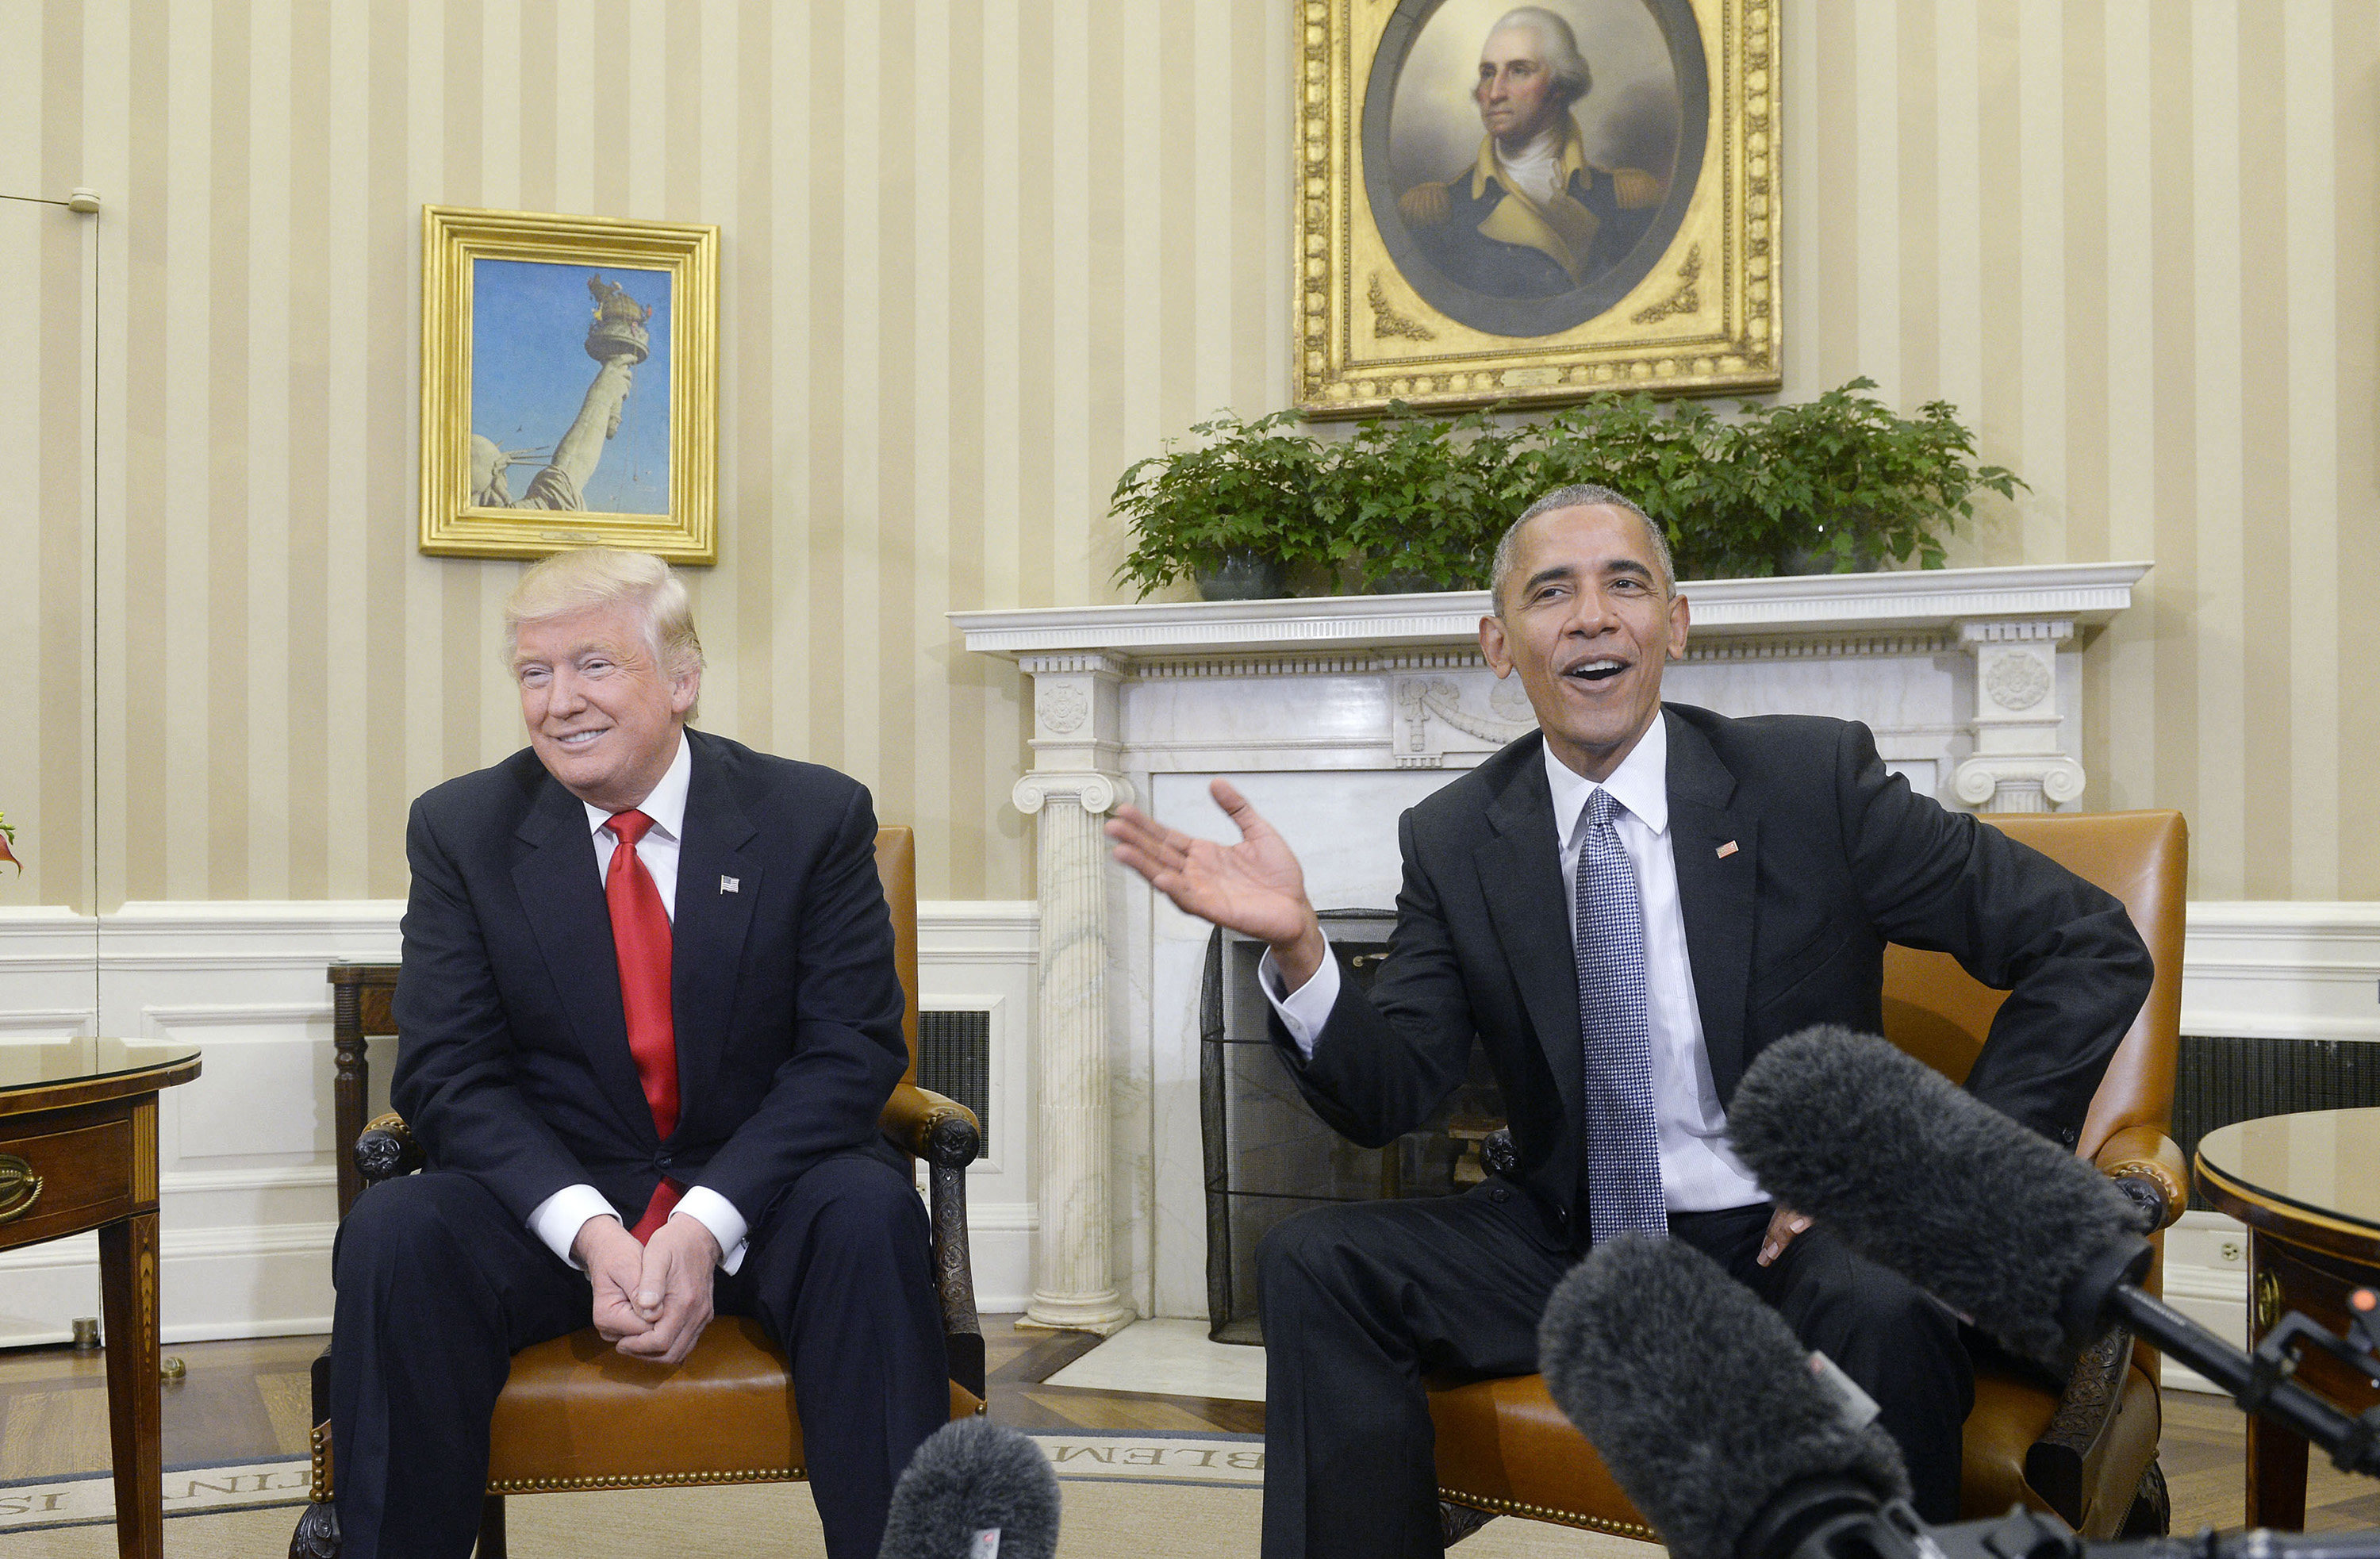 US President Barack Obama with President-elect Donald Trump at the White House in 2016. File photo: Abaca Press/TNS